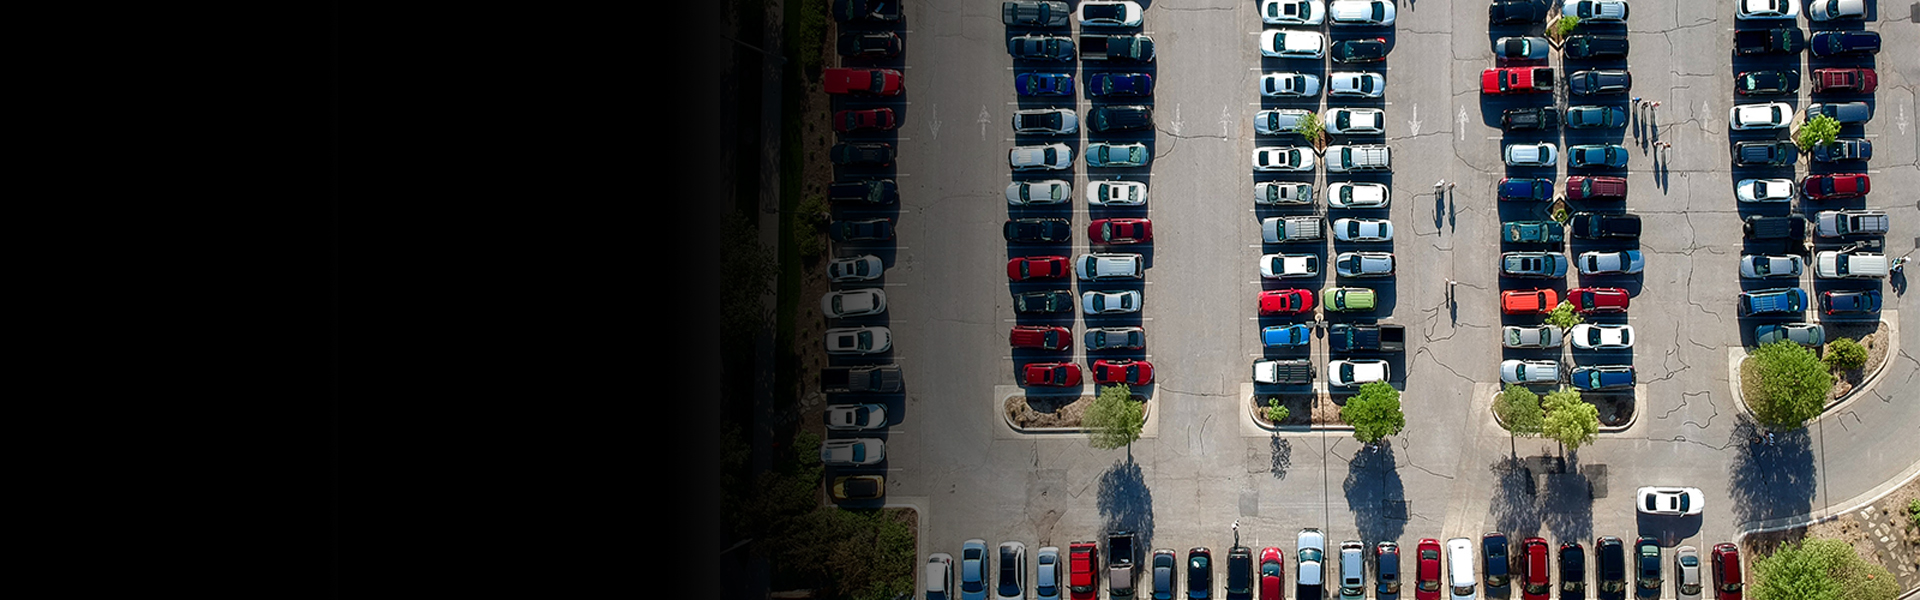 Forget where you parked your car?  - New research studies memory encoding